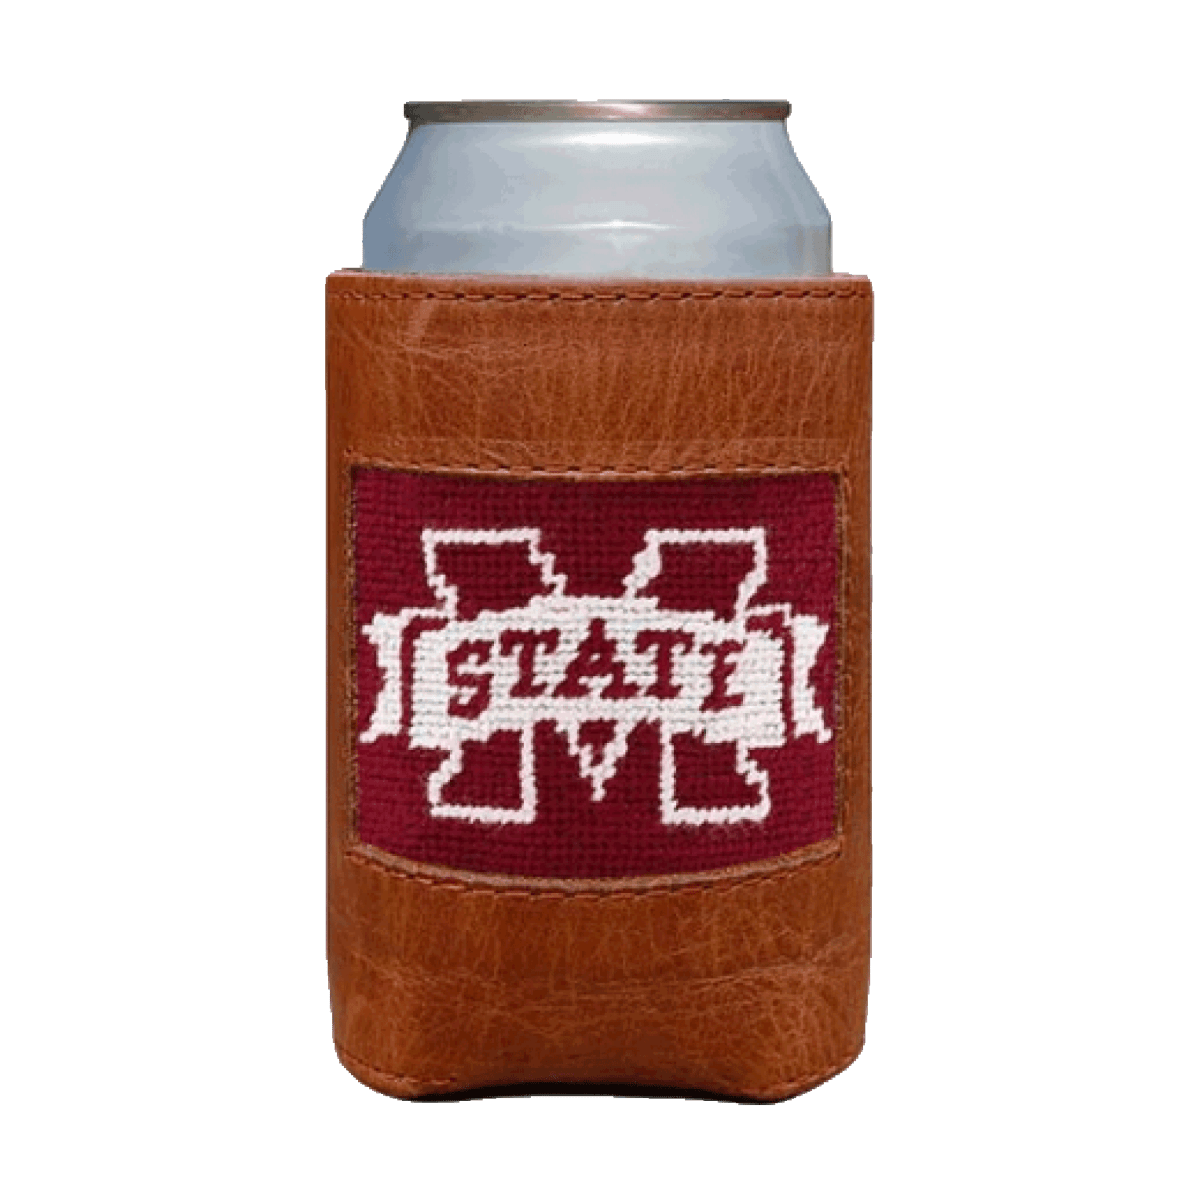 MSU Smathers and Branson Can Cooler - Shop B-Unlimited